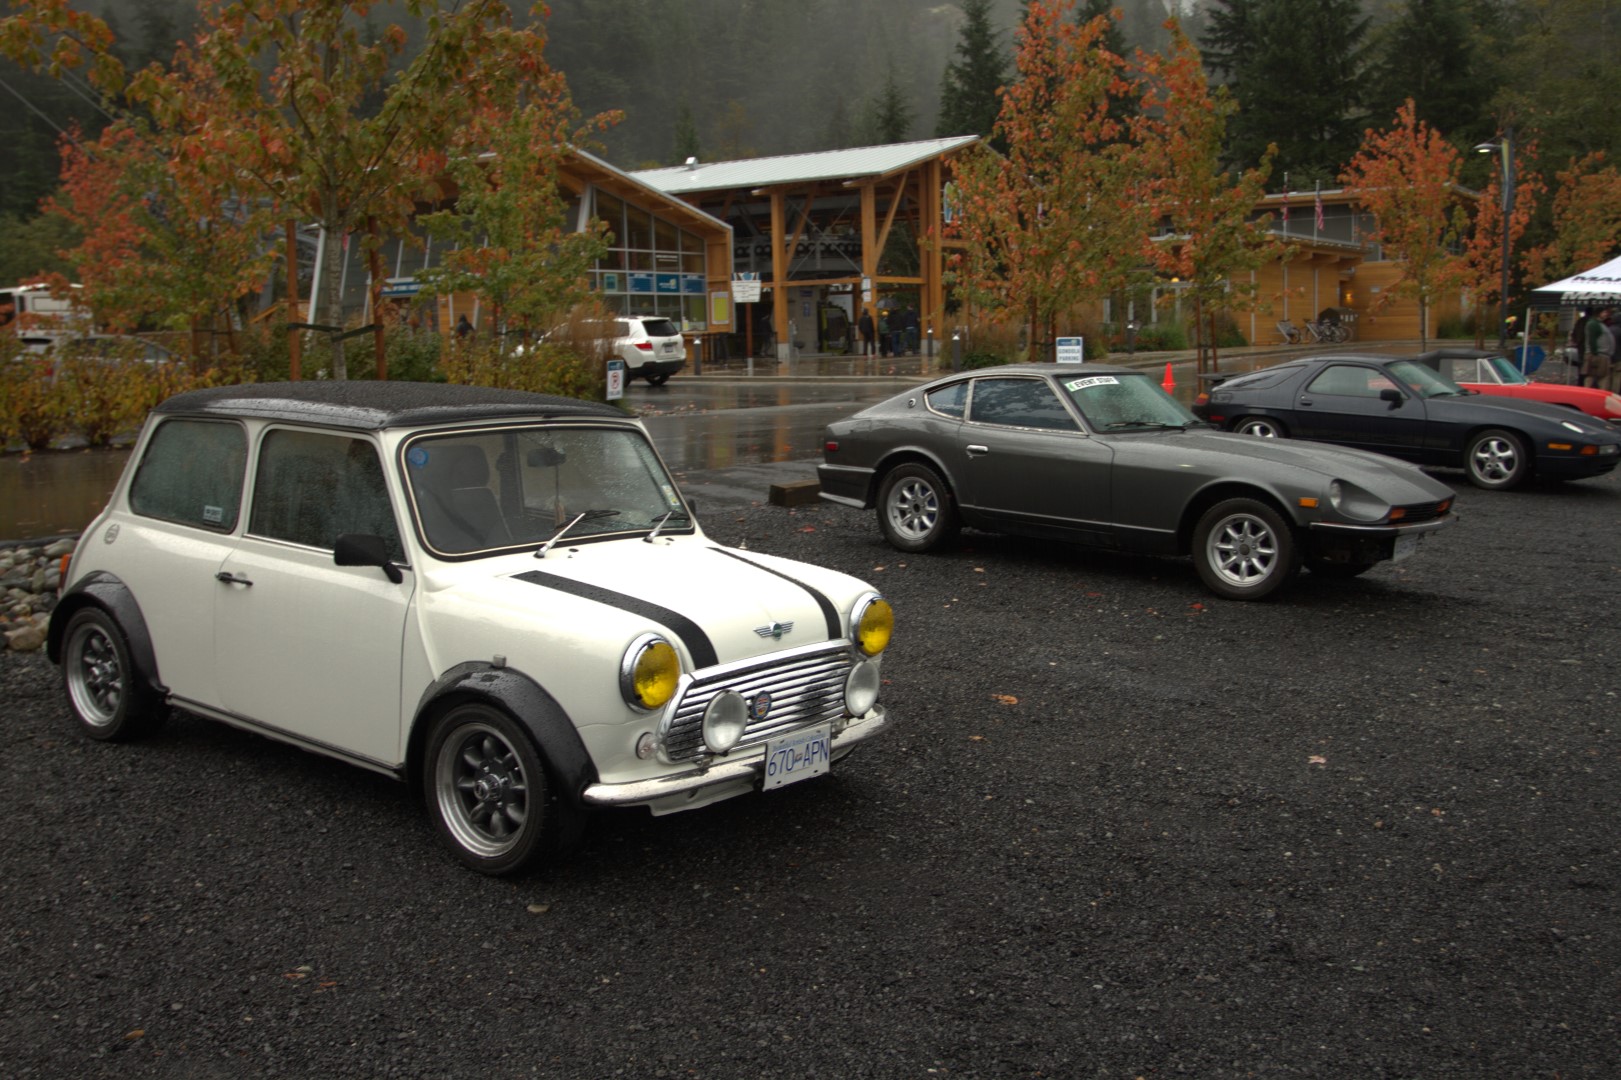 A Japanese spec Min, and another Datsun braving the weather